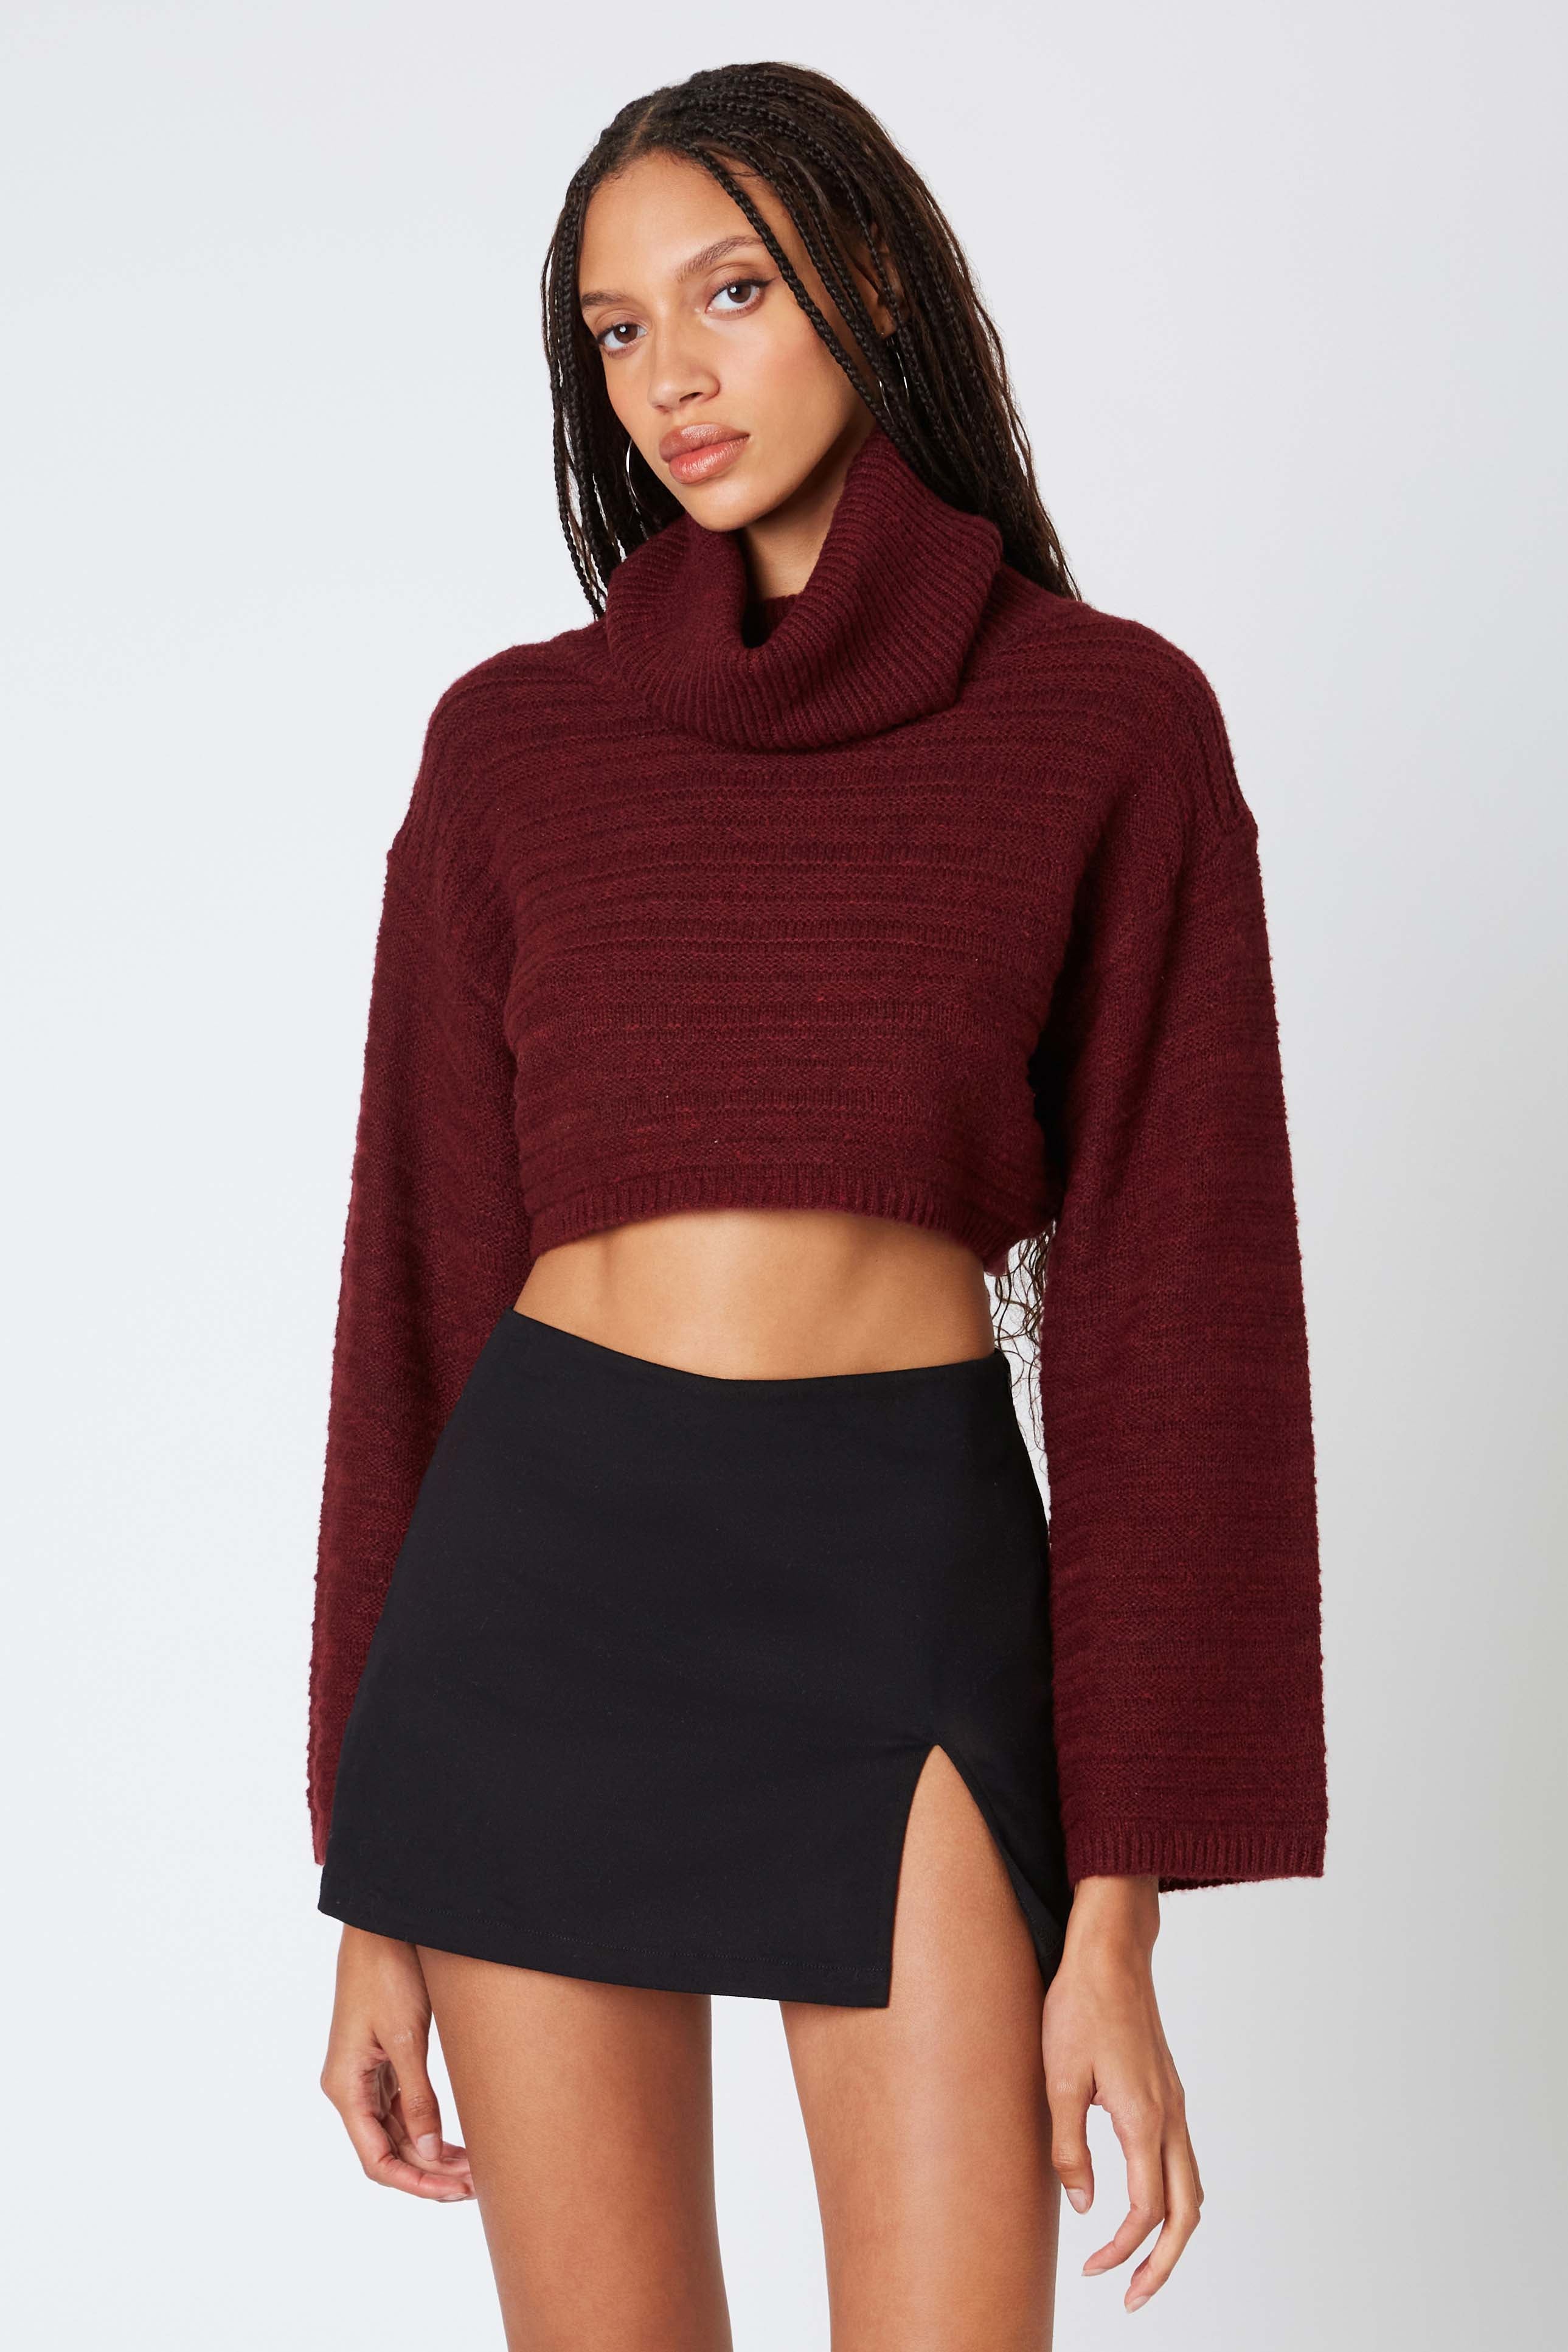 Cropped Turtleneck Sweater in Wine Front View